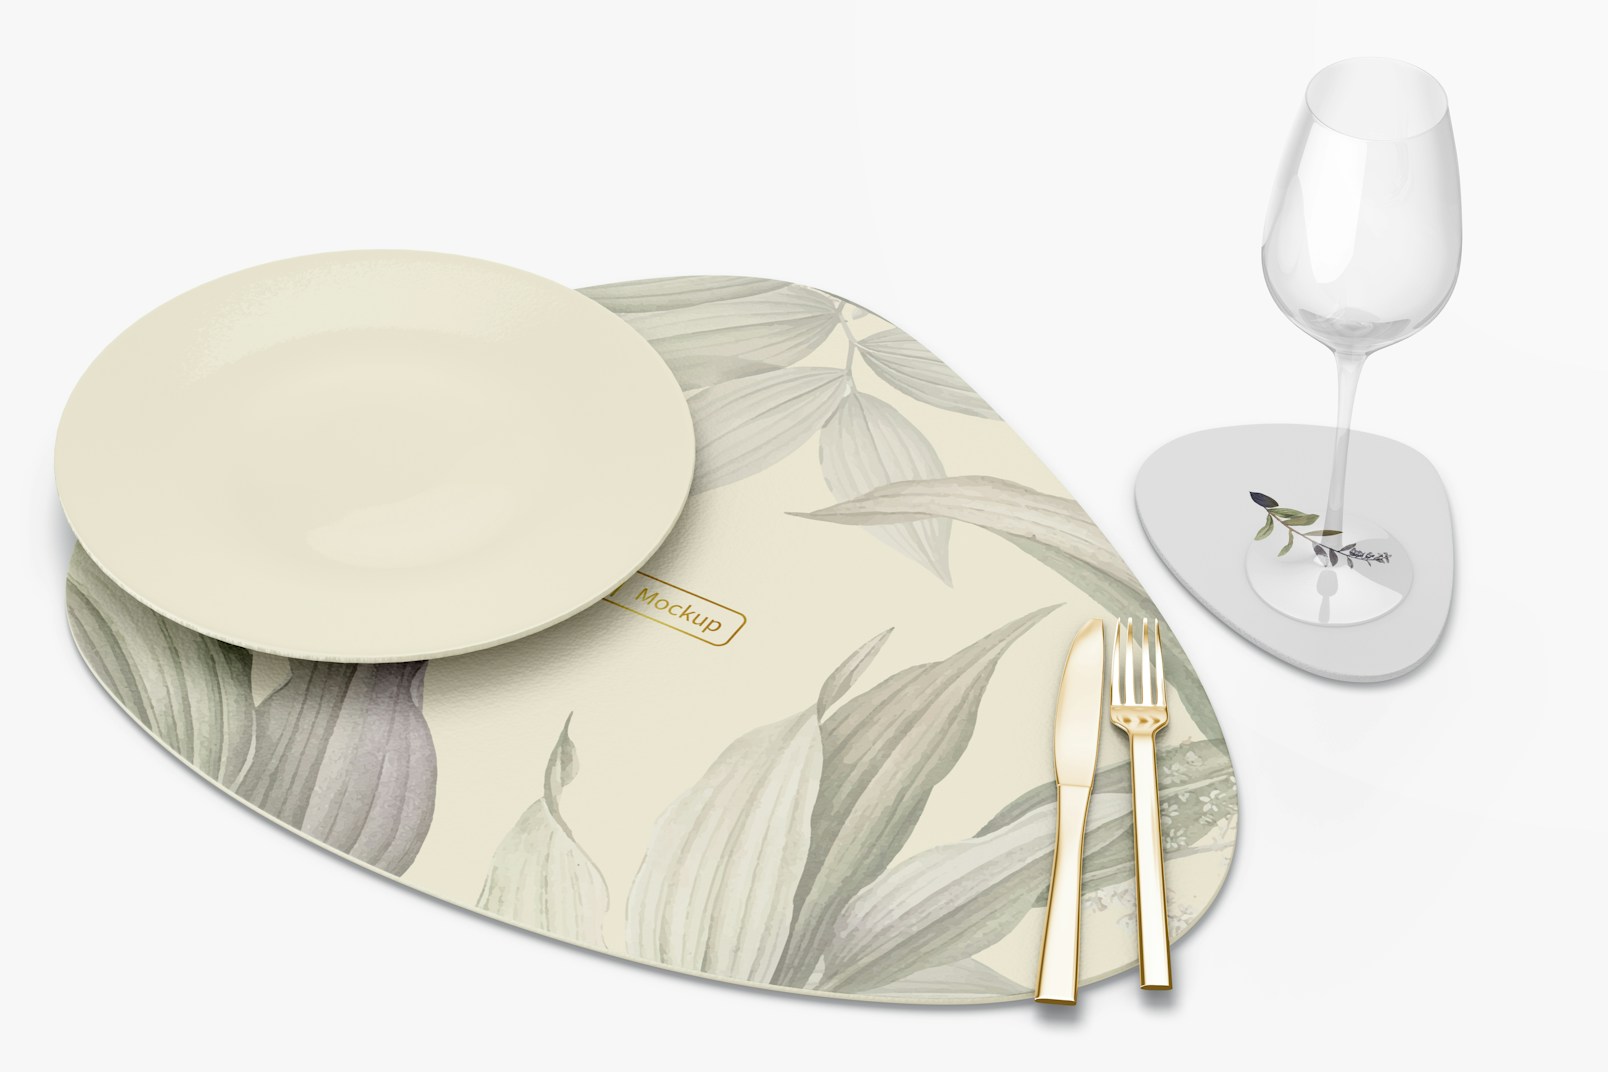 Foam Placemat with Plates Mockup